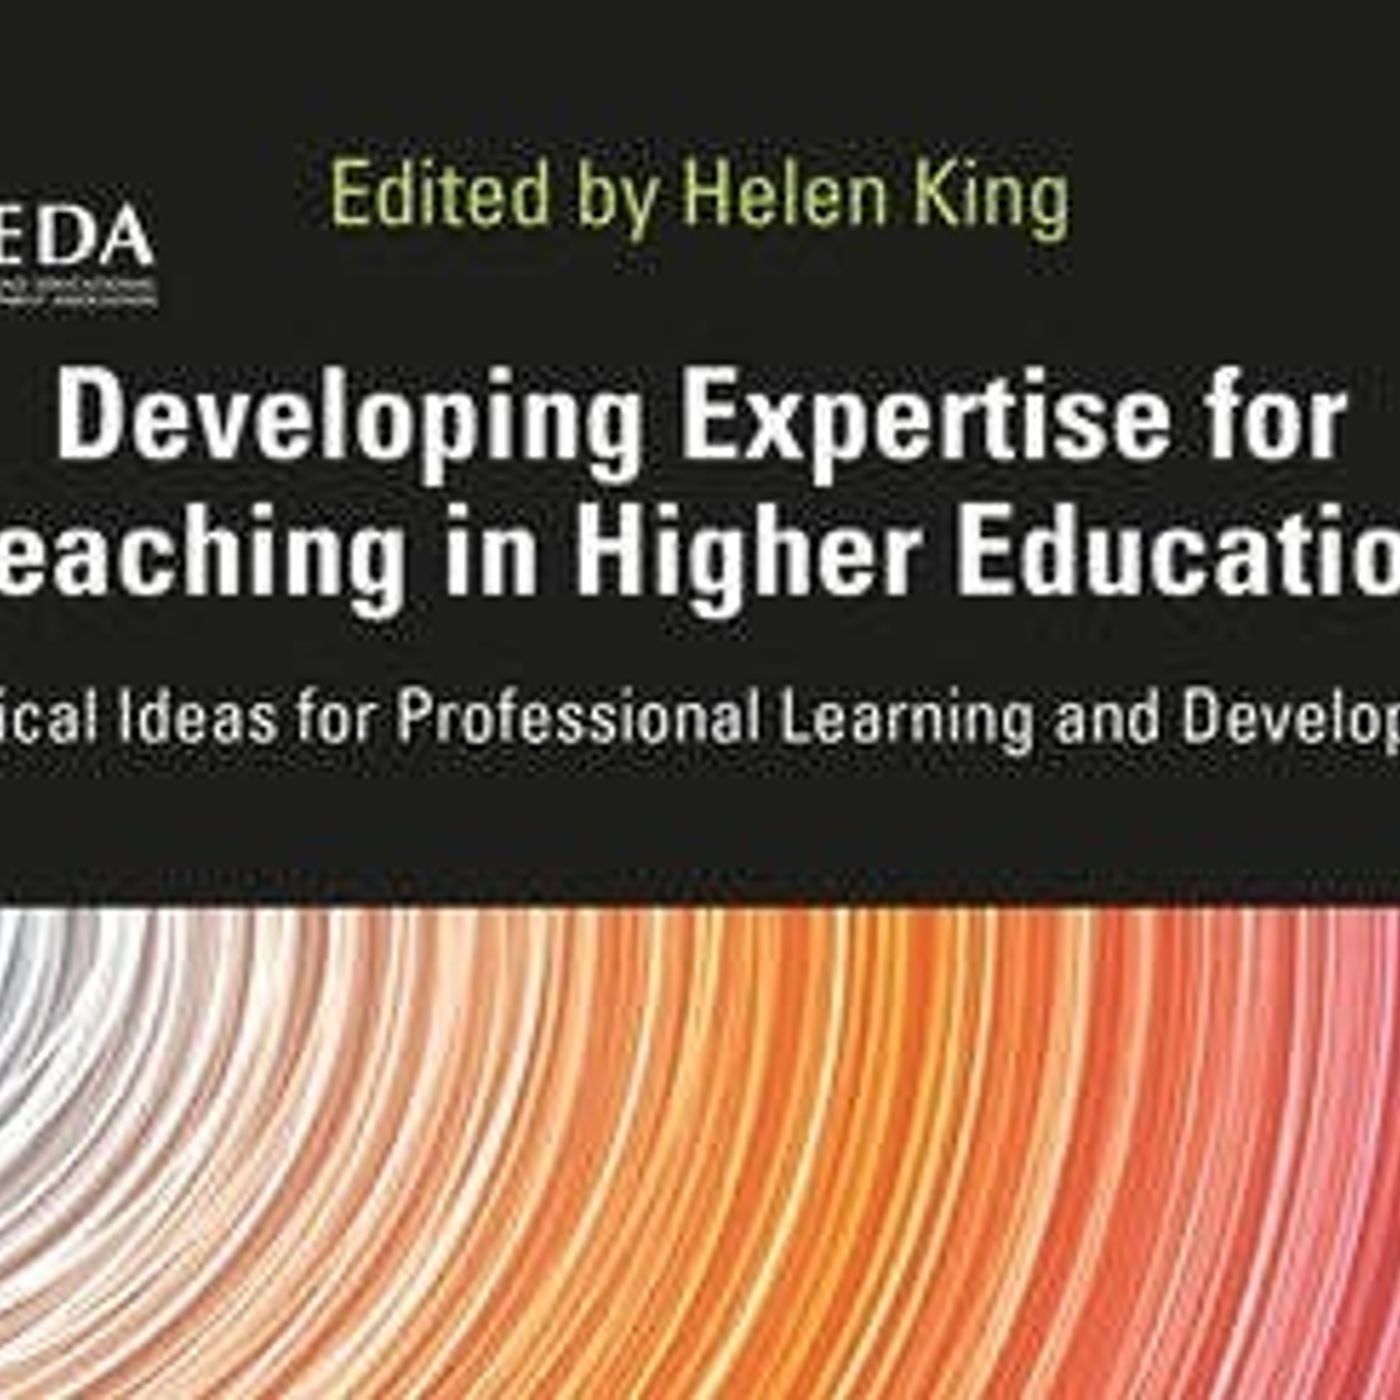 5: Book Launch - Developing Expertise for Teaching in Higher Education